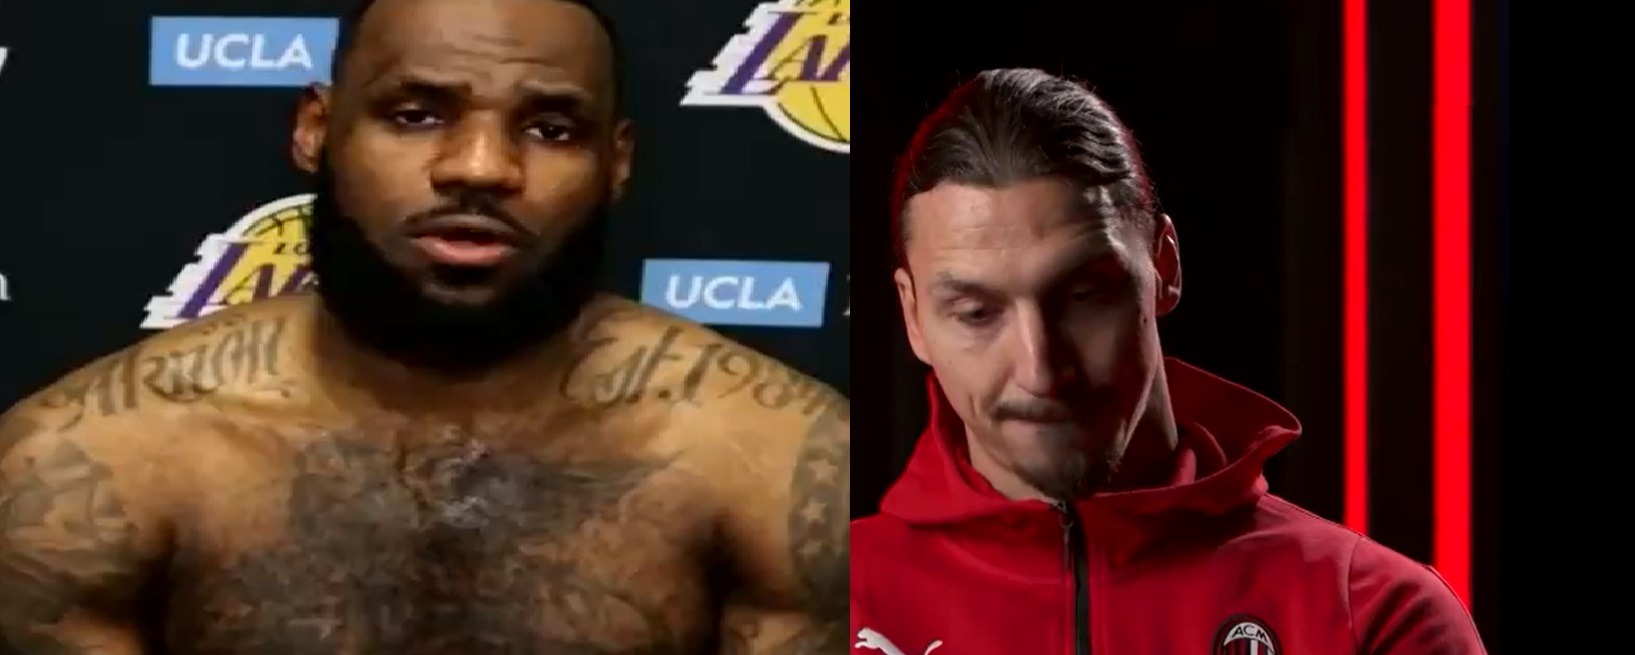 Lebron James Reacts to Zlatan Ibrahimovic With Ether Response to Criticism About His Activism